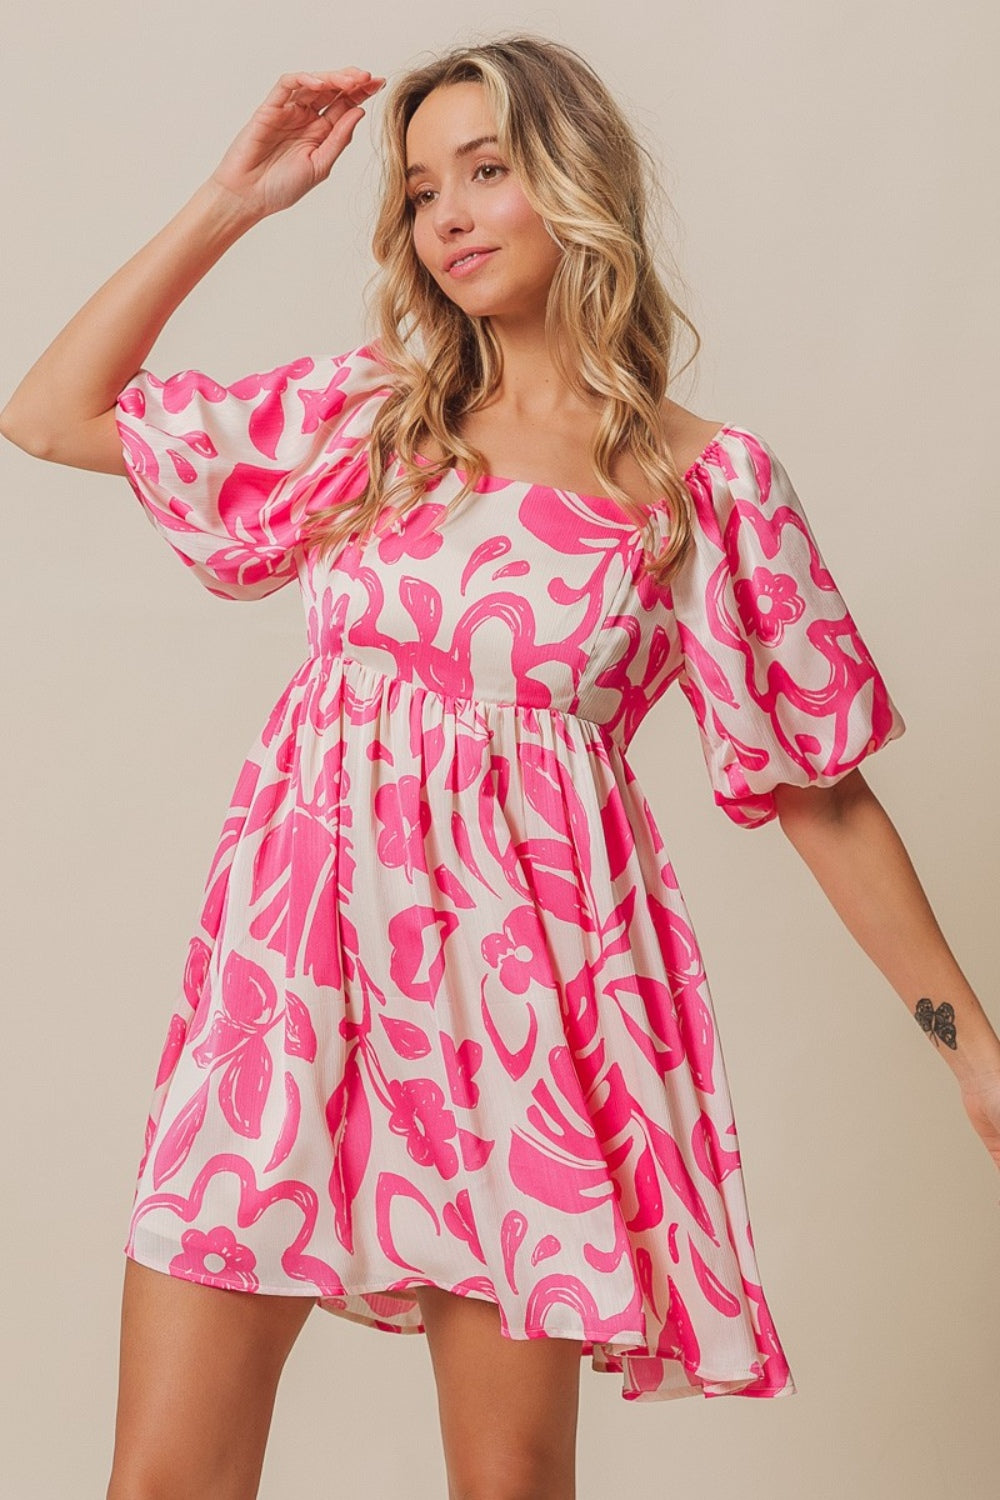 BiBi Tropical Floral Pattern Puff Sleeve Square Neck Dress - Cowtown Bling N Things